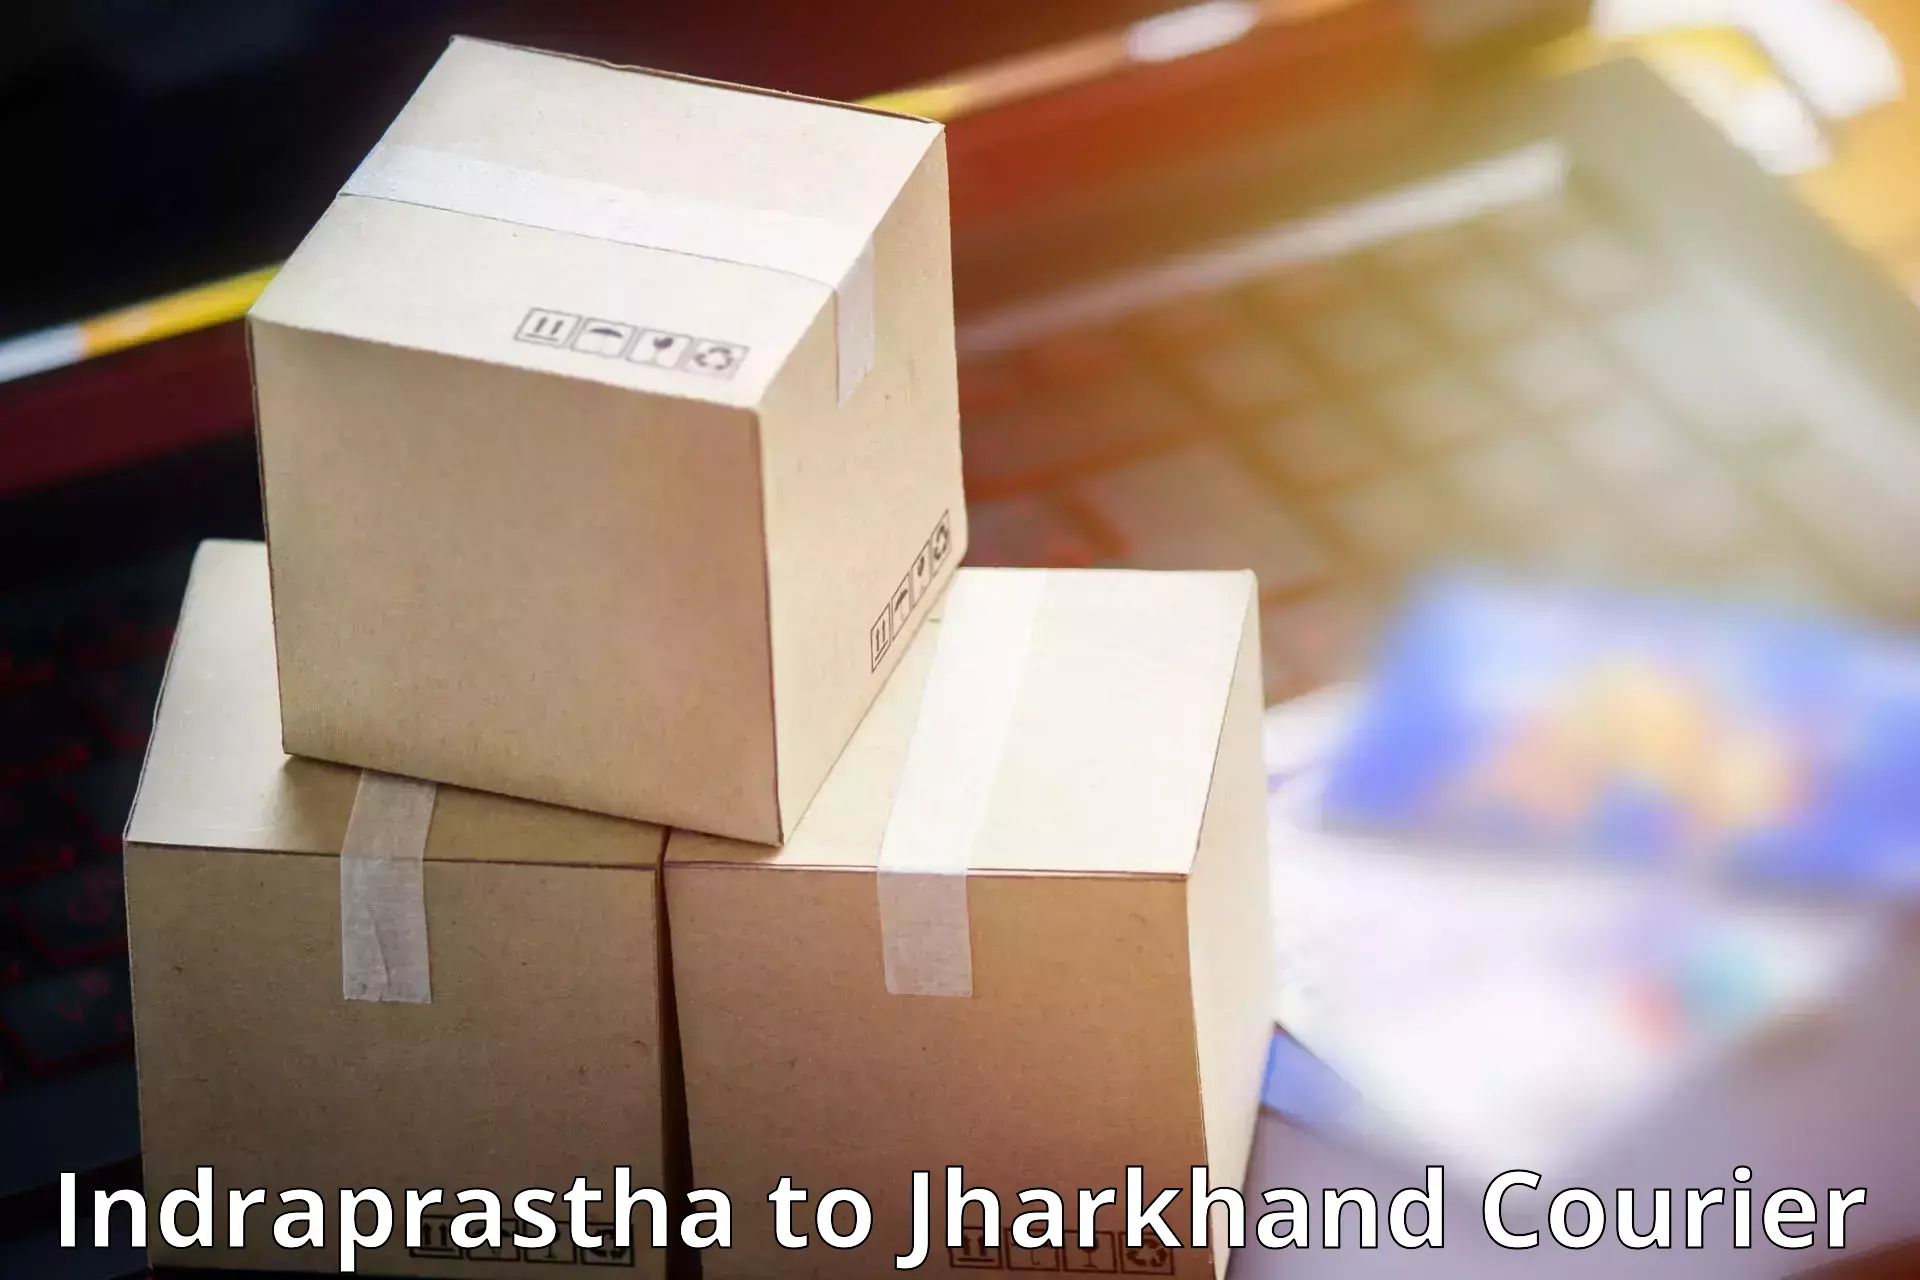 On-call courier service in Indraprastha to Padma Hazaribagh